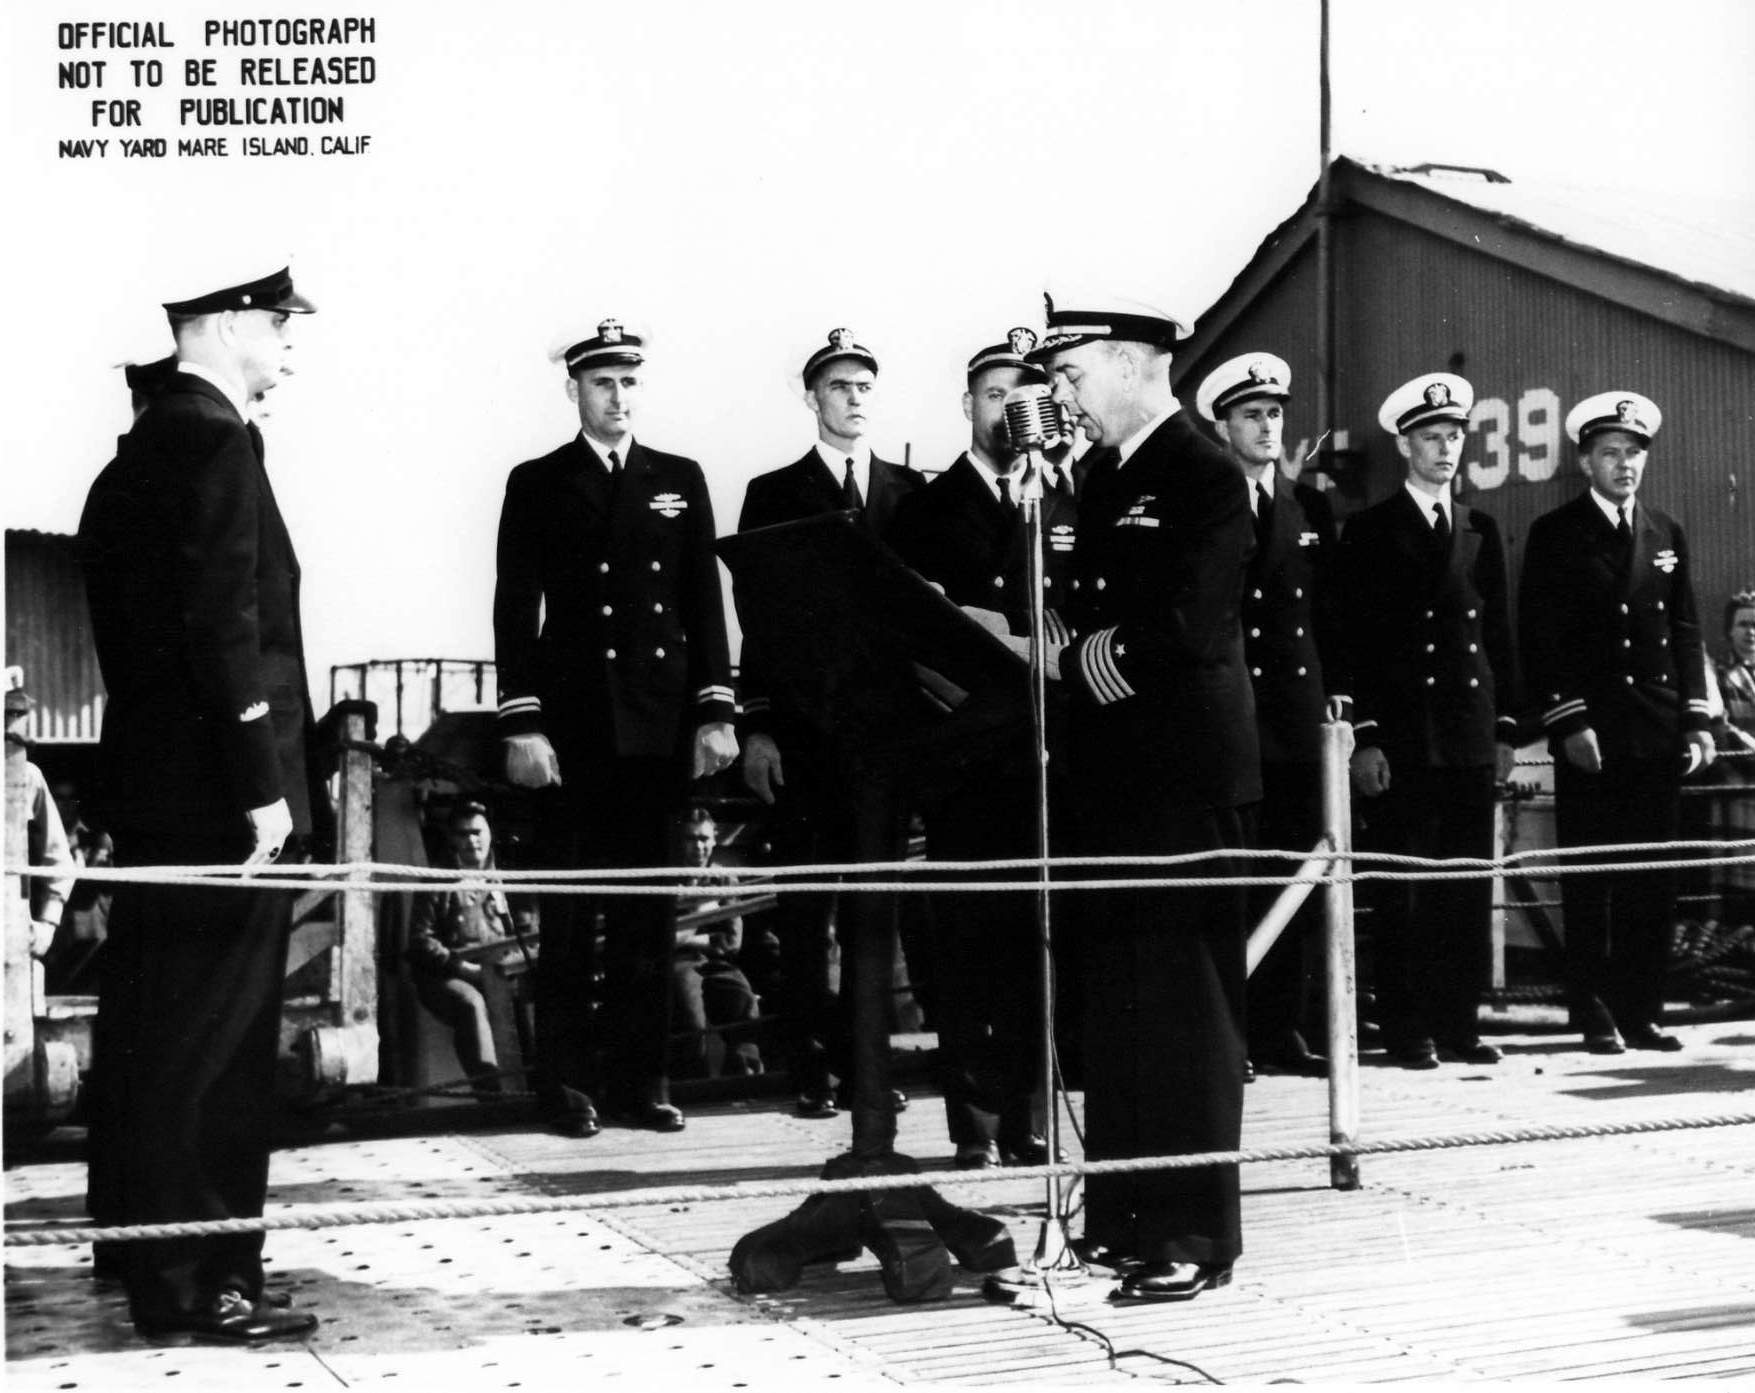 Commissioning ceremony of USS Tang, Mare Island Navy Yard, Vallejo, California, United States, 15 Oct 1943